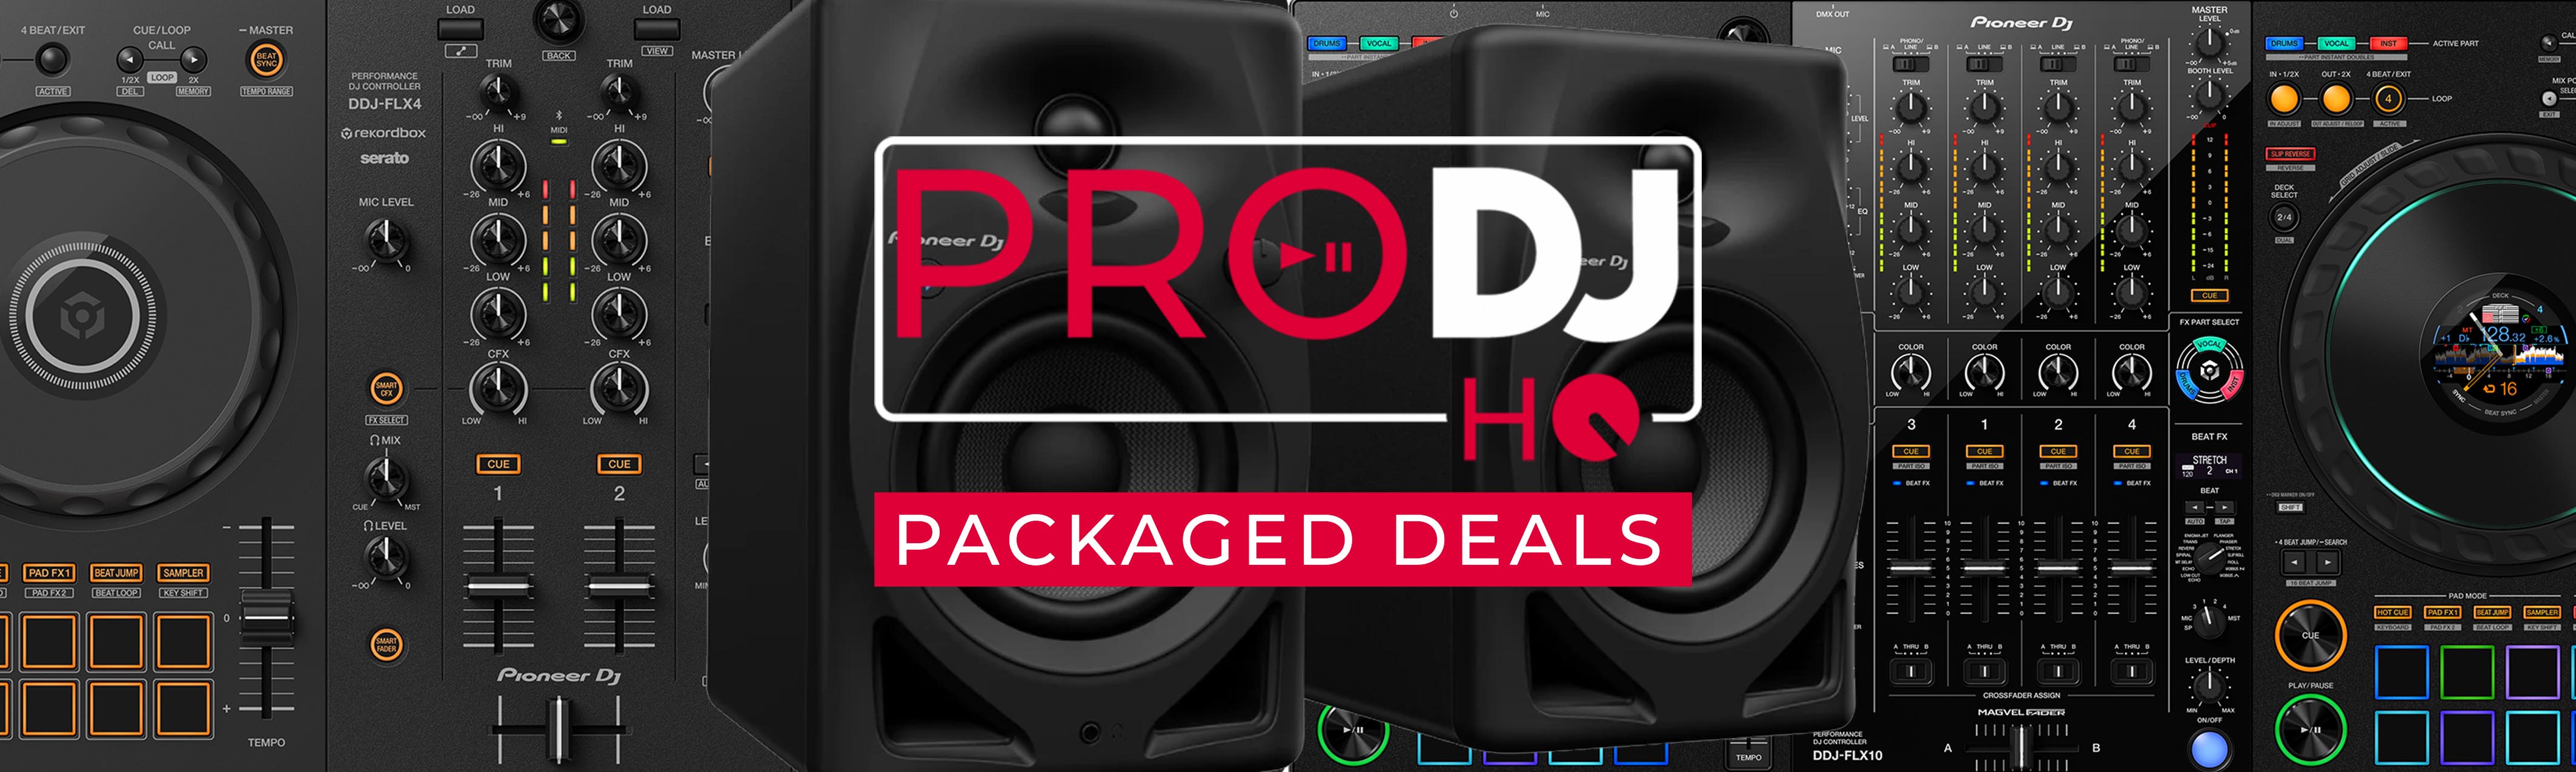 Experienced DJ Packages